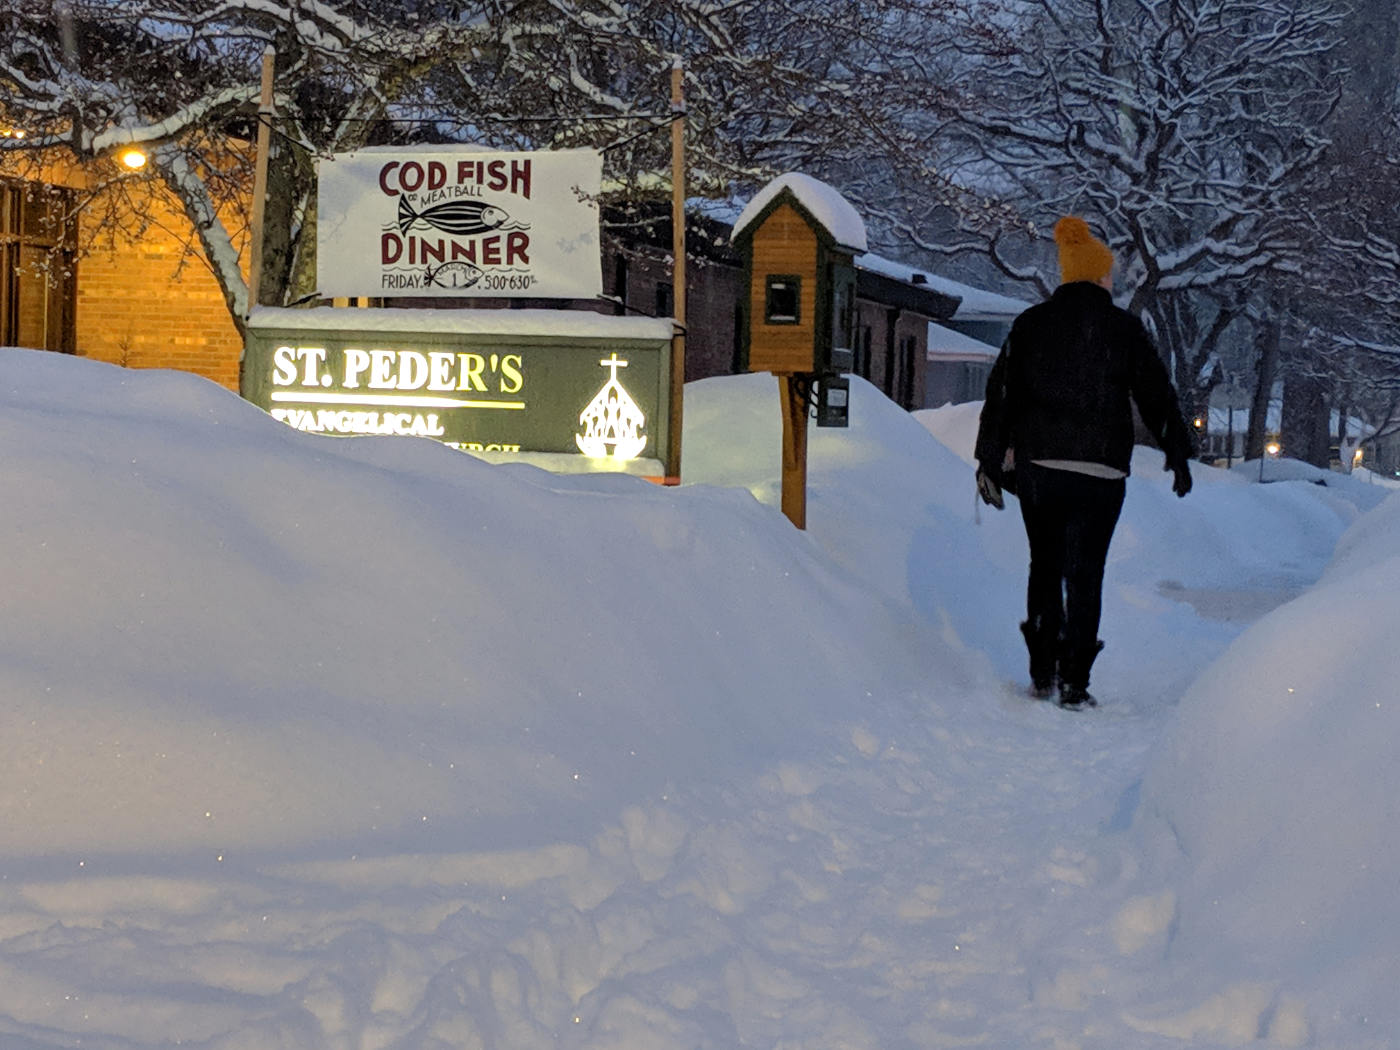 Person walking in snow by sign for Cod Fish Dinner over sign for ST. PEDER'S EVANGELICAL, with bottom of sign covered by snow mound.